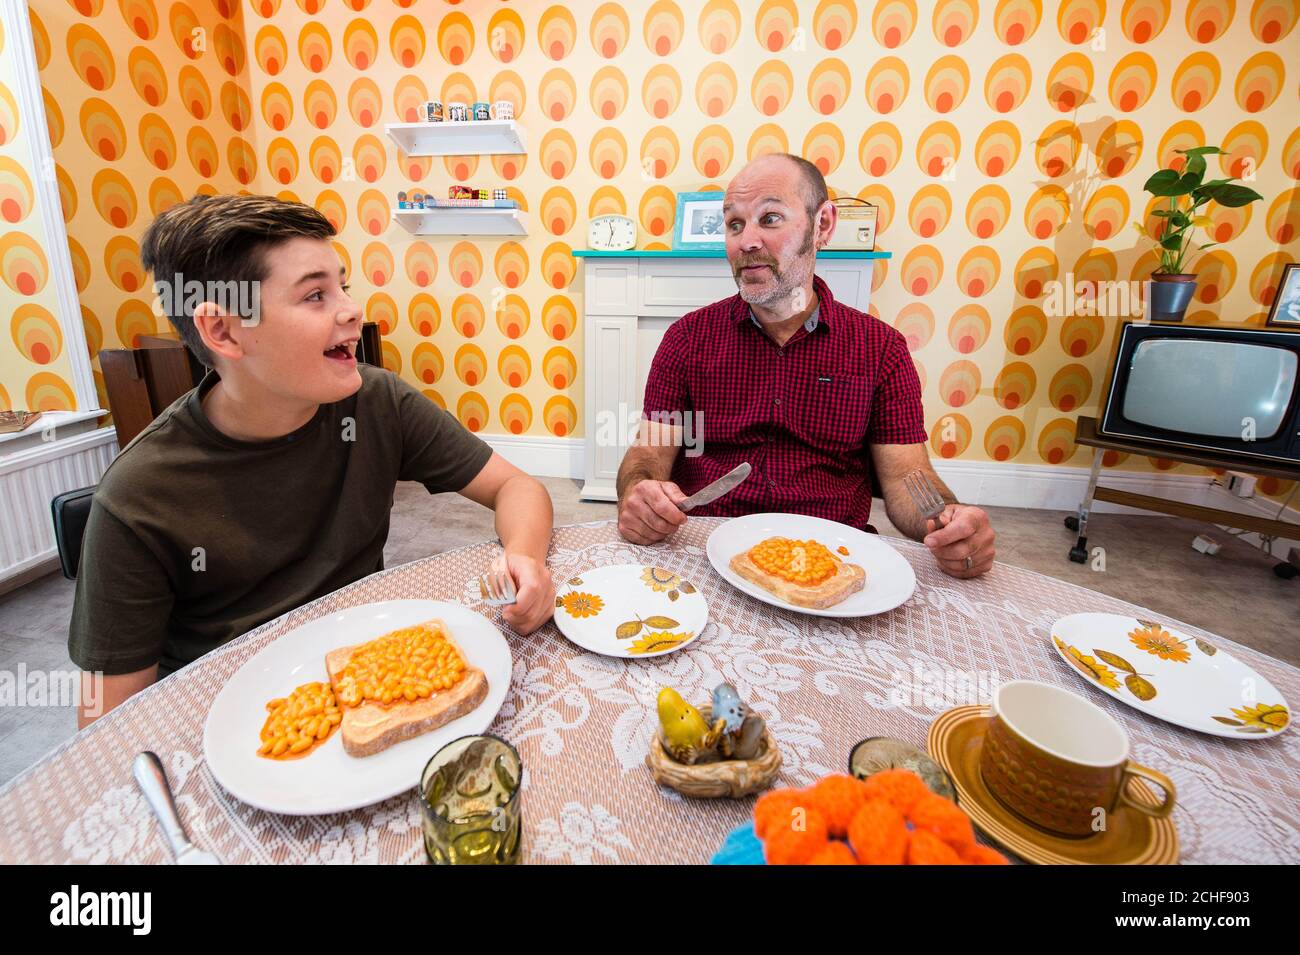 Dylan Fenton, aged 13, and Ali Fenton from Barnstable, visit the 'Heinz Beanz Muzeum', which is open from Friday August 30th to Sunday September 1st at White Space gallery in Covent Garden, London. Stock Photo